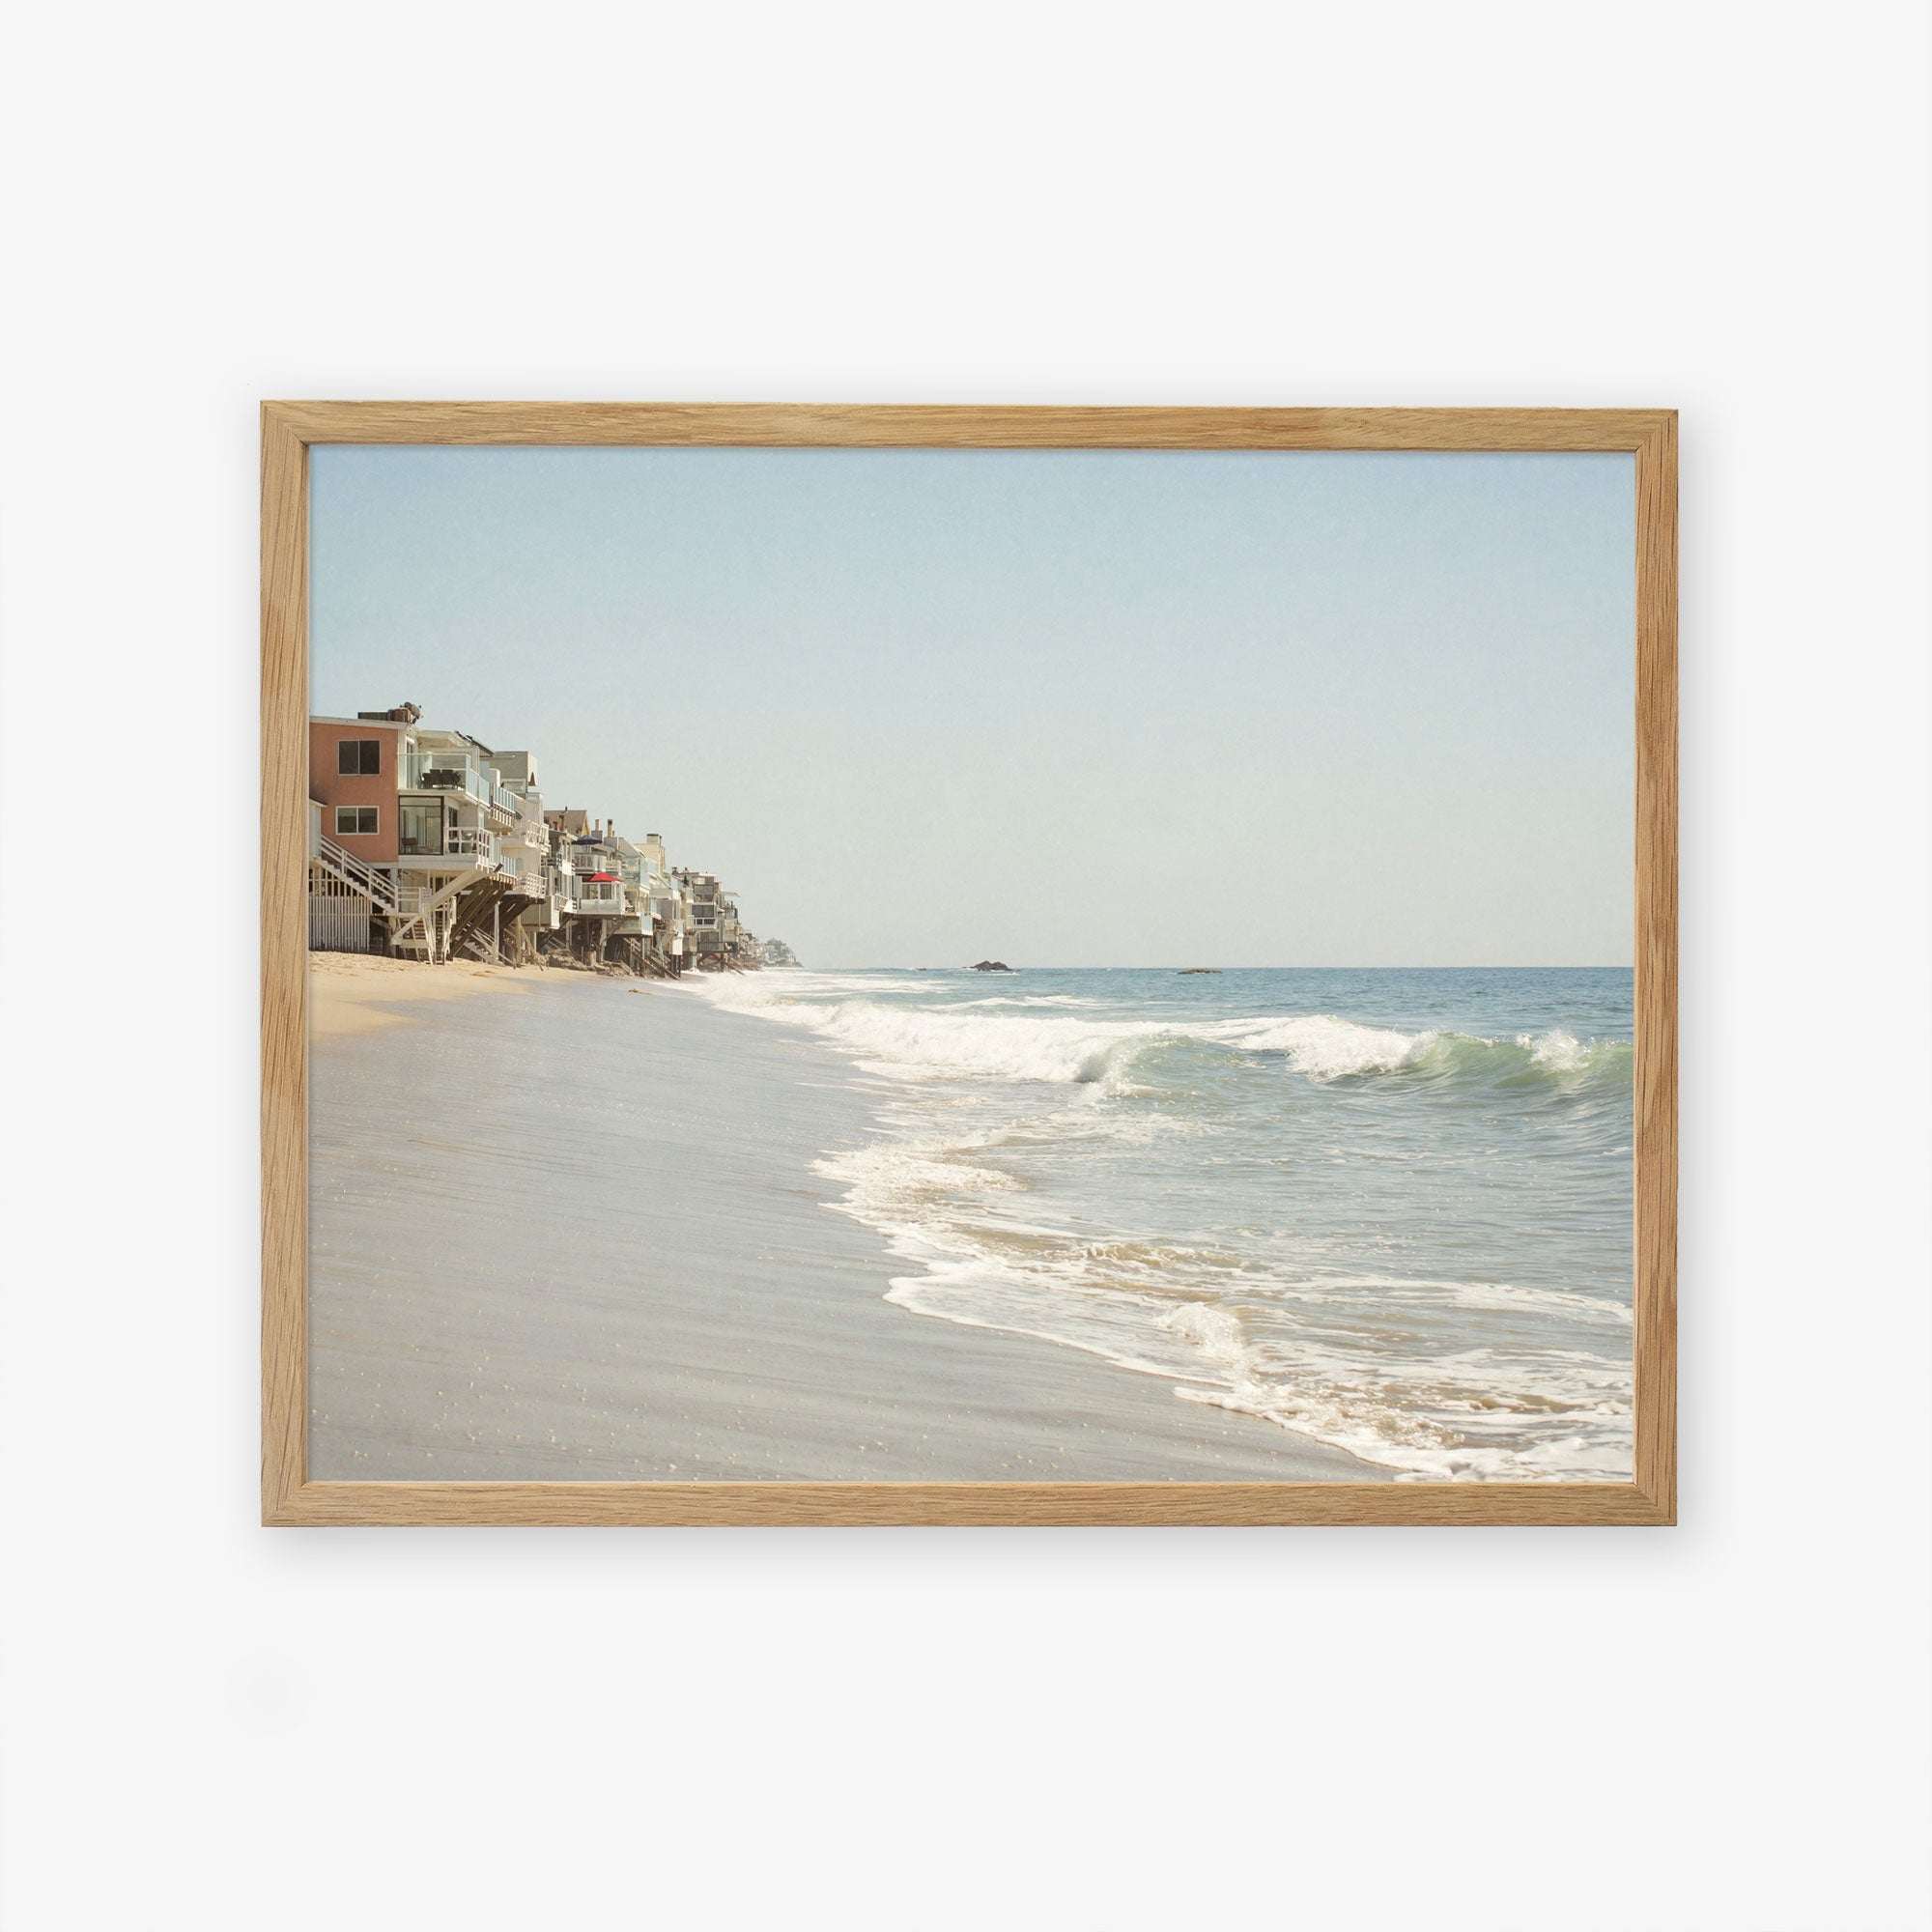 A frame of the Malibu Beach House Print, &#39;Ocean View&#39; by Offley Green.